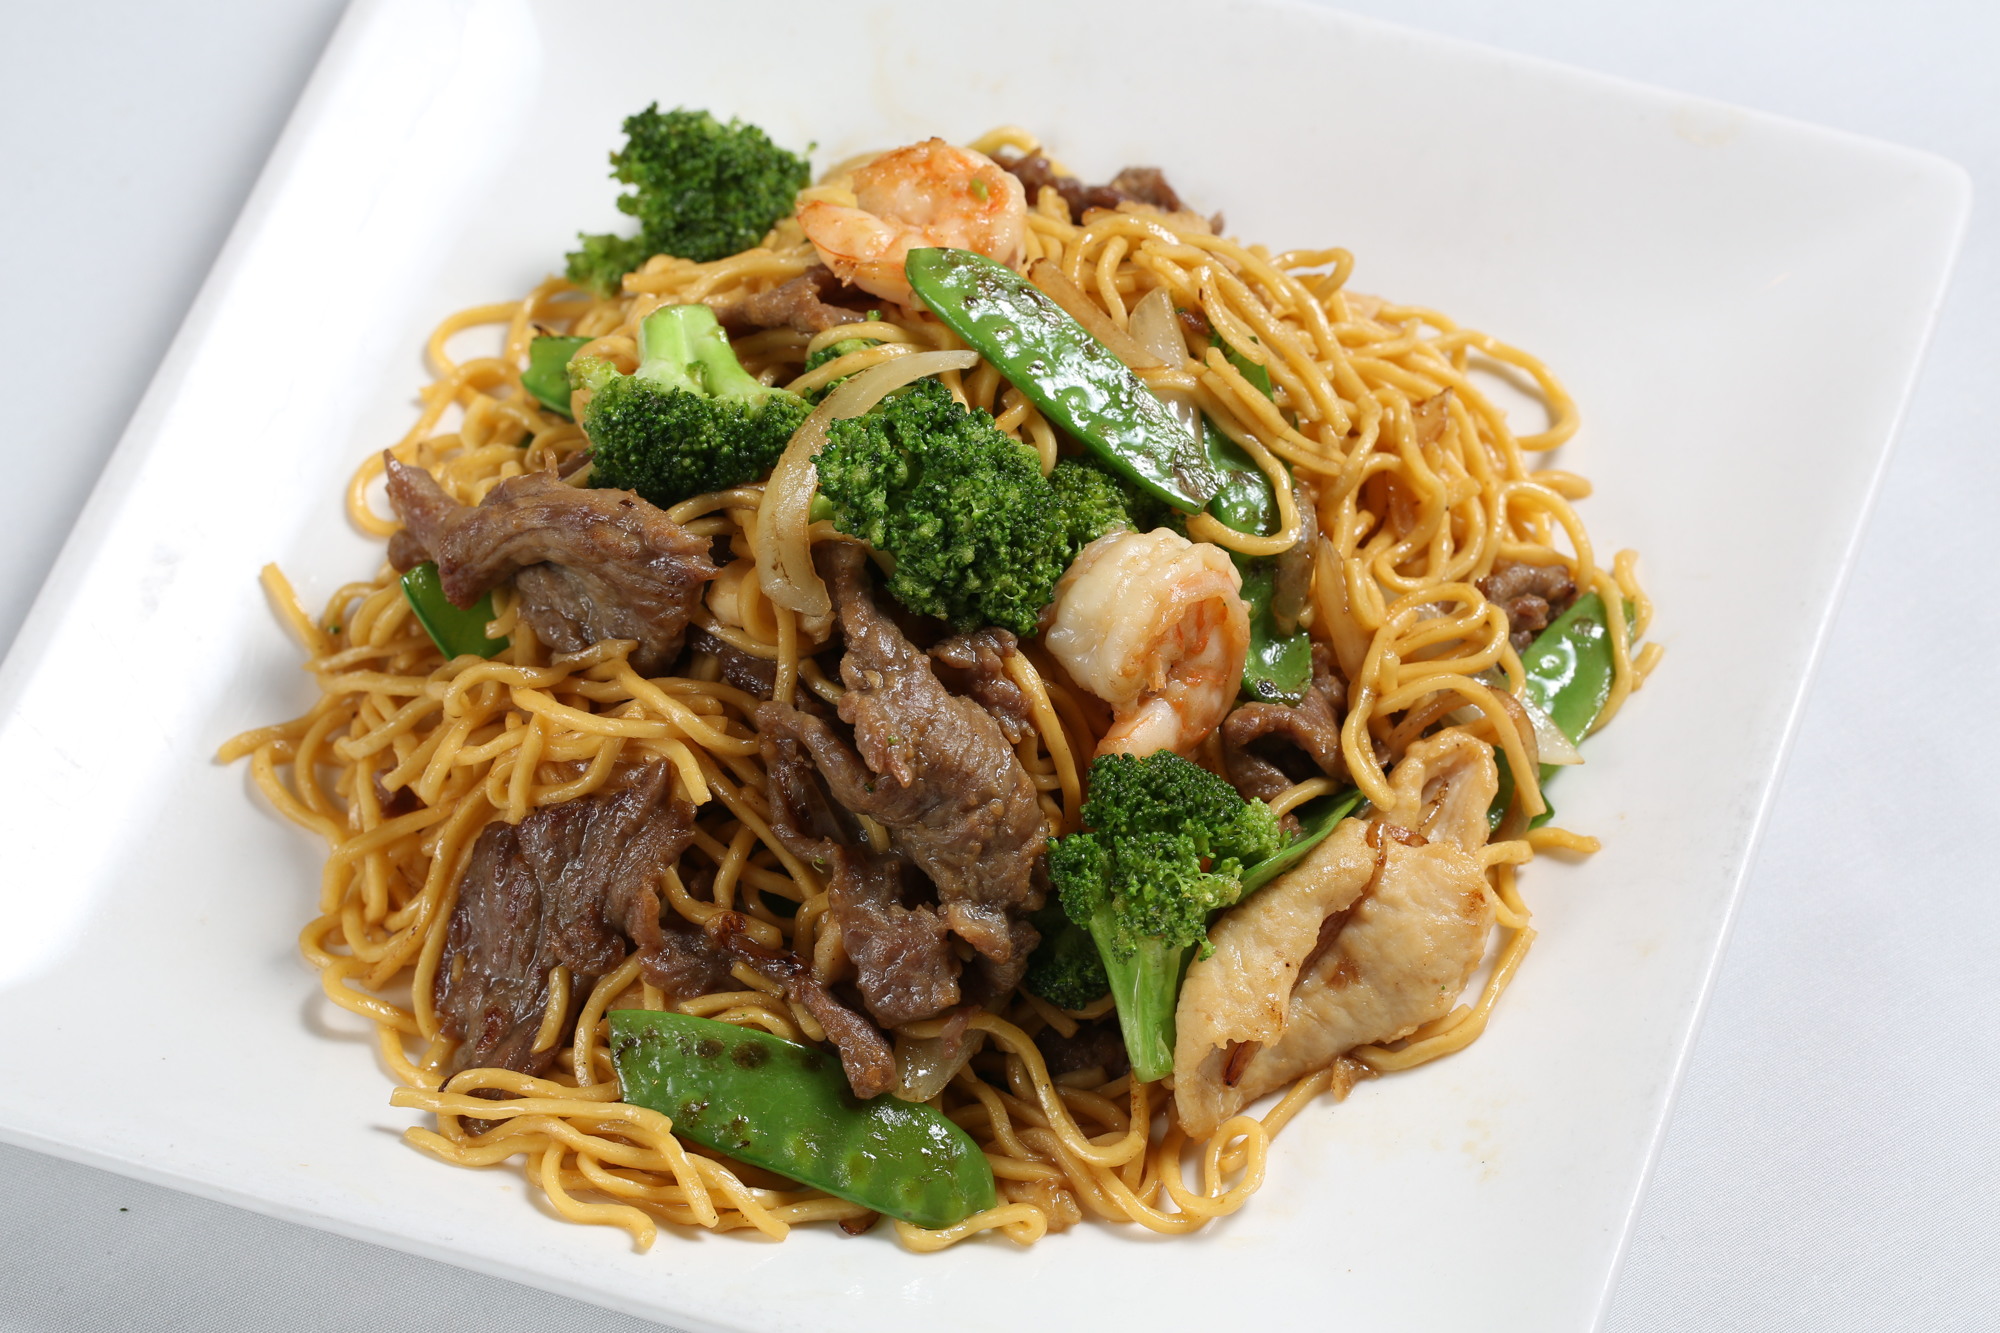 In addition to fresh seafood and dim sum, YH Seafood Clubhouse will offer a selection of other Chinese dishes, such as its Bistro Lo Mein